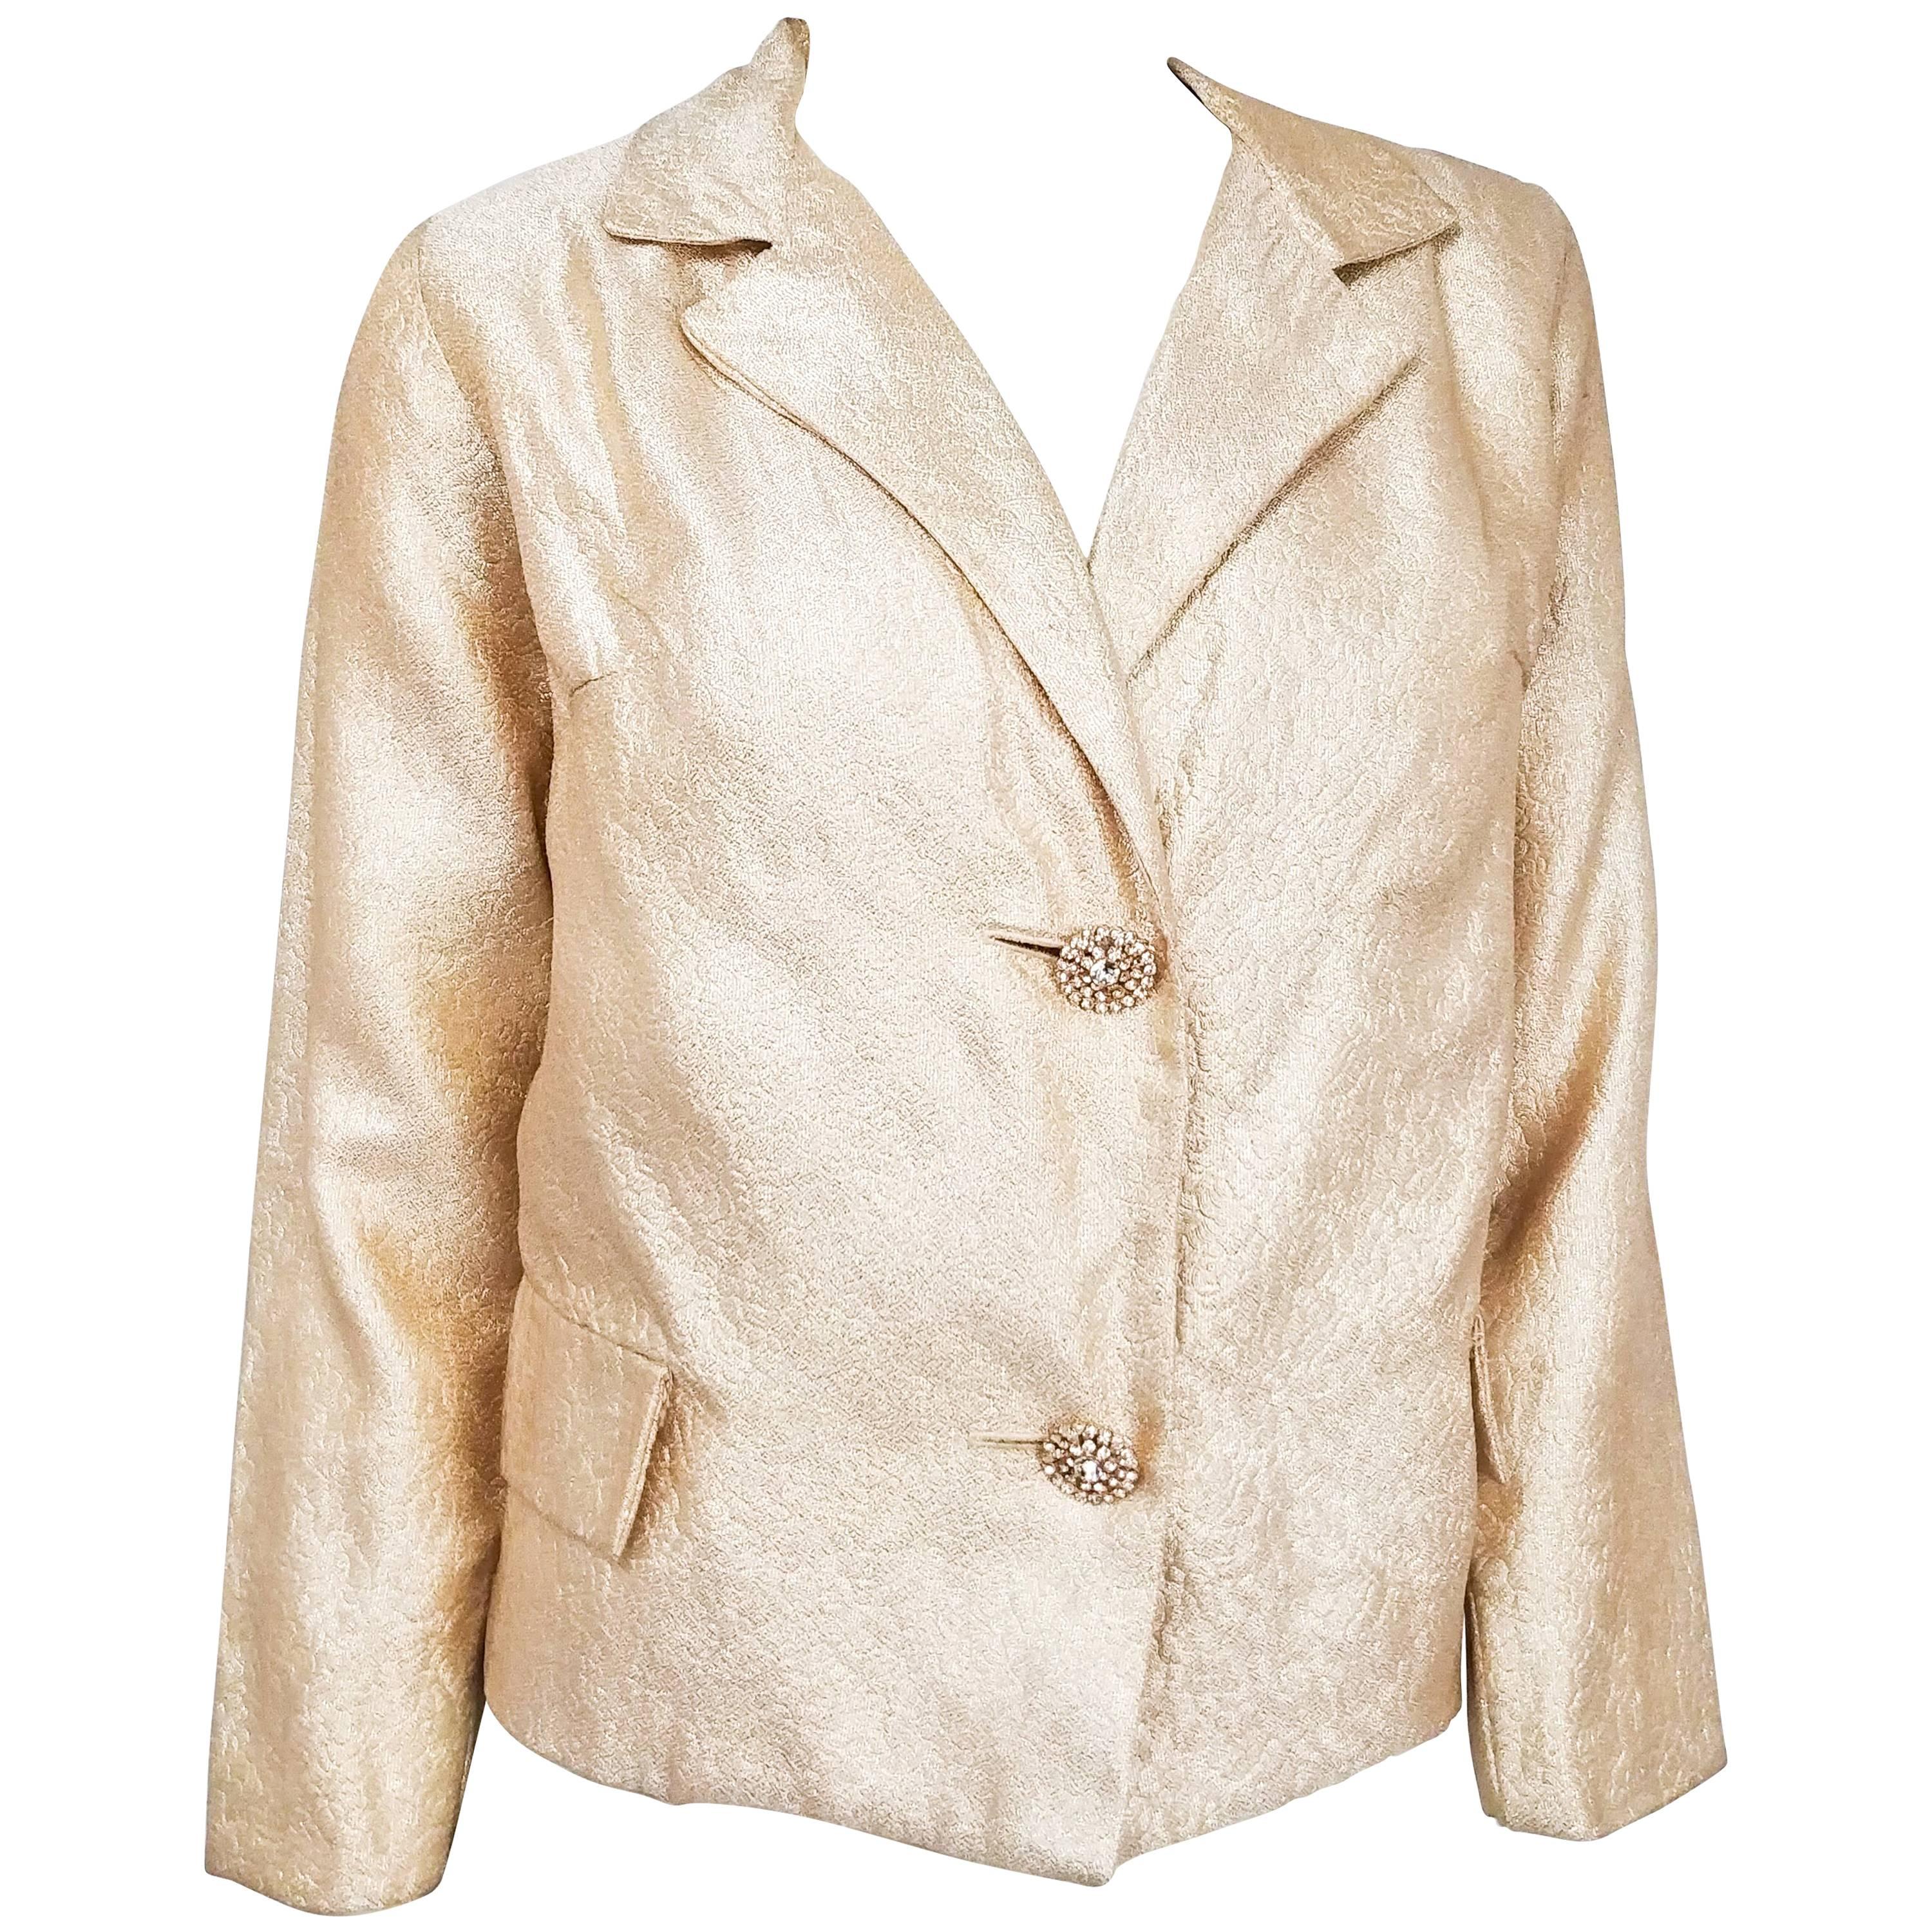 1960s Adele Simpson Gold Jacket w/ Rhinestone Buttons For Sale